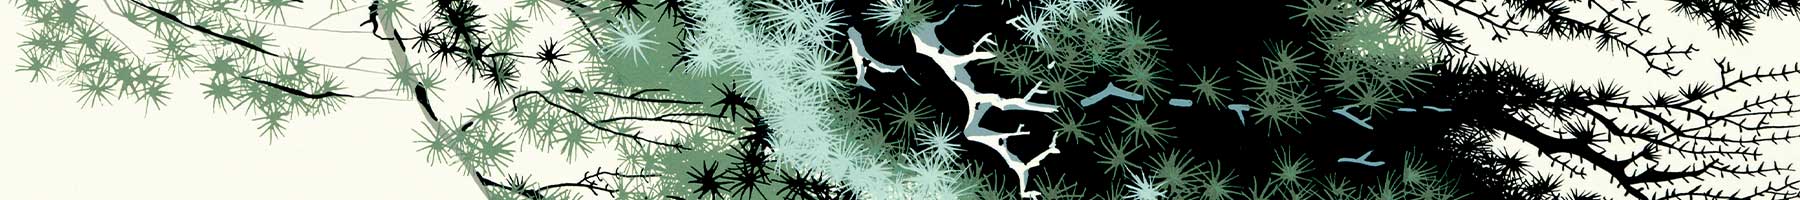 abstract style illustration of pine needles and branches